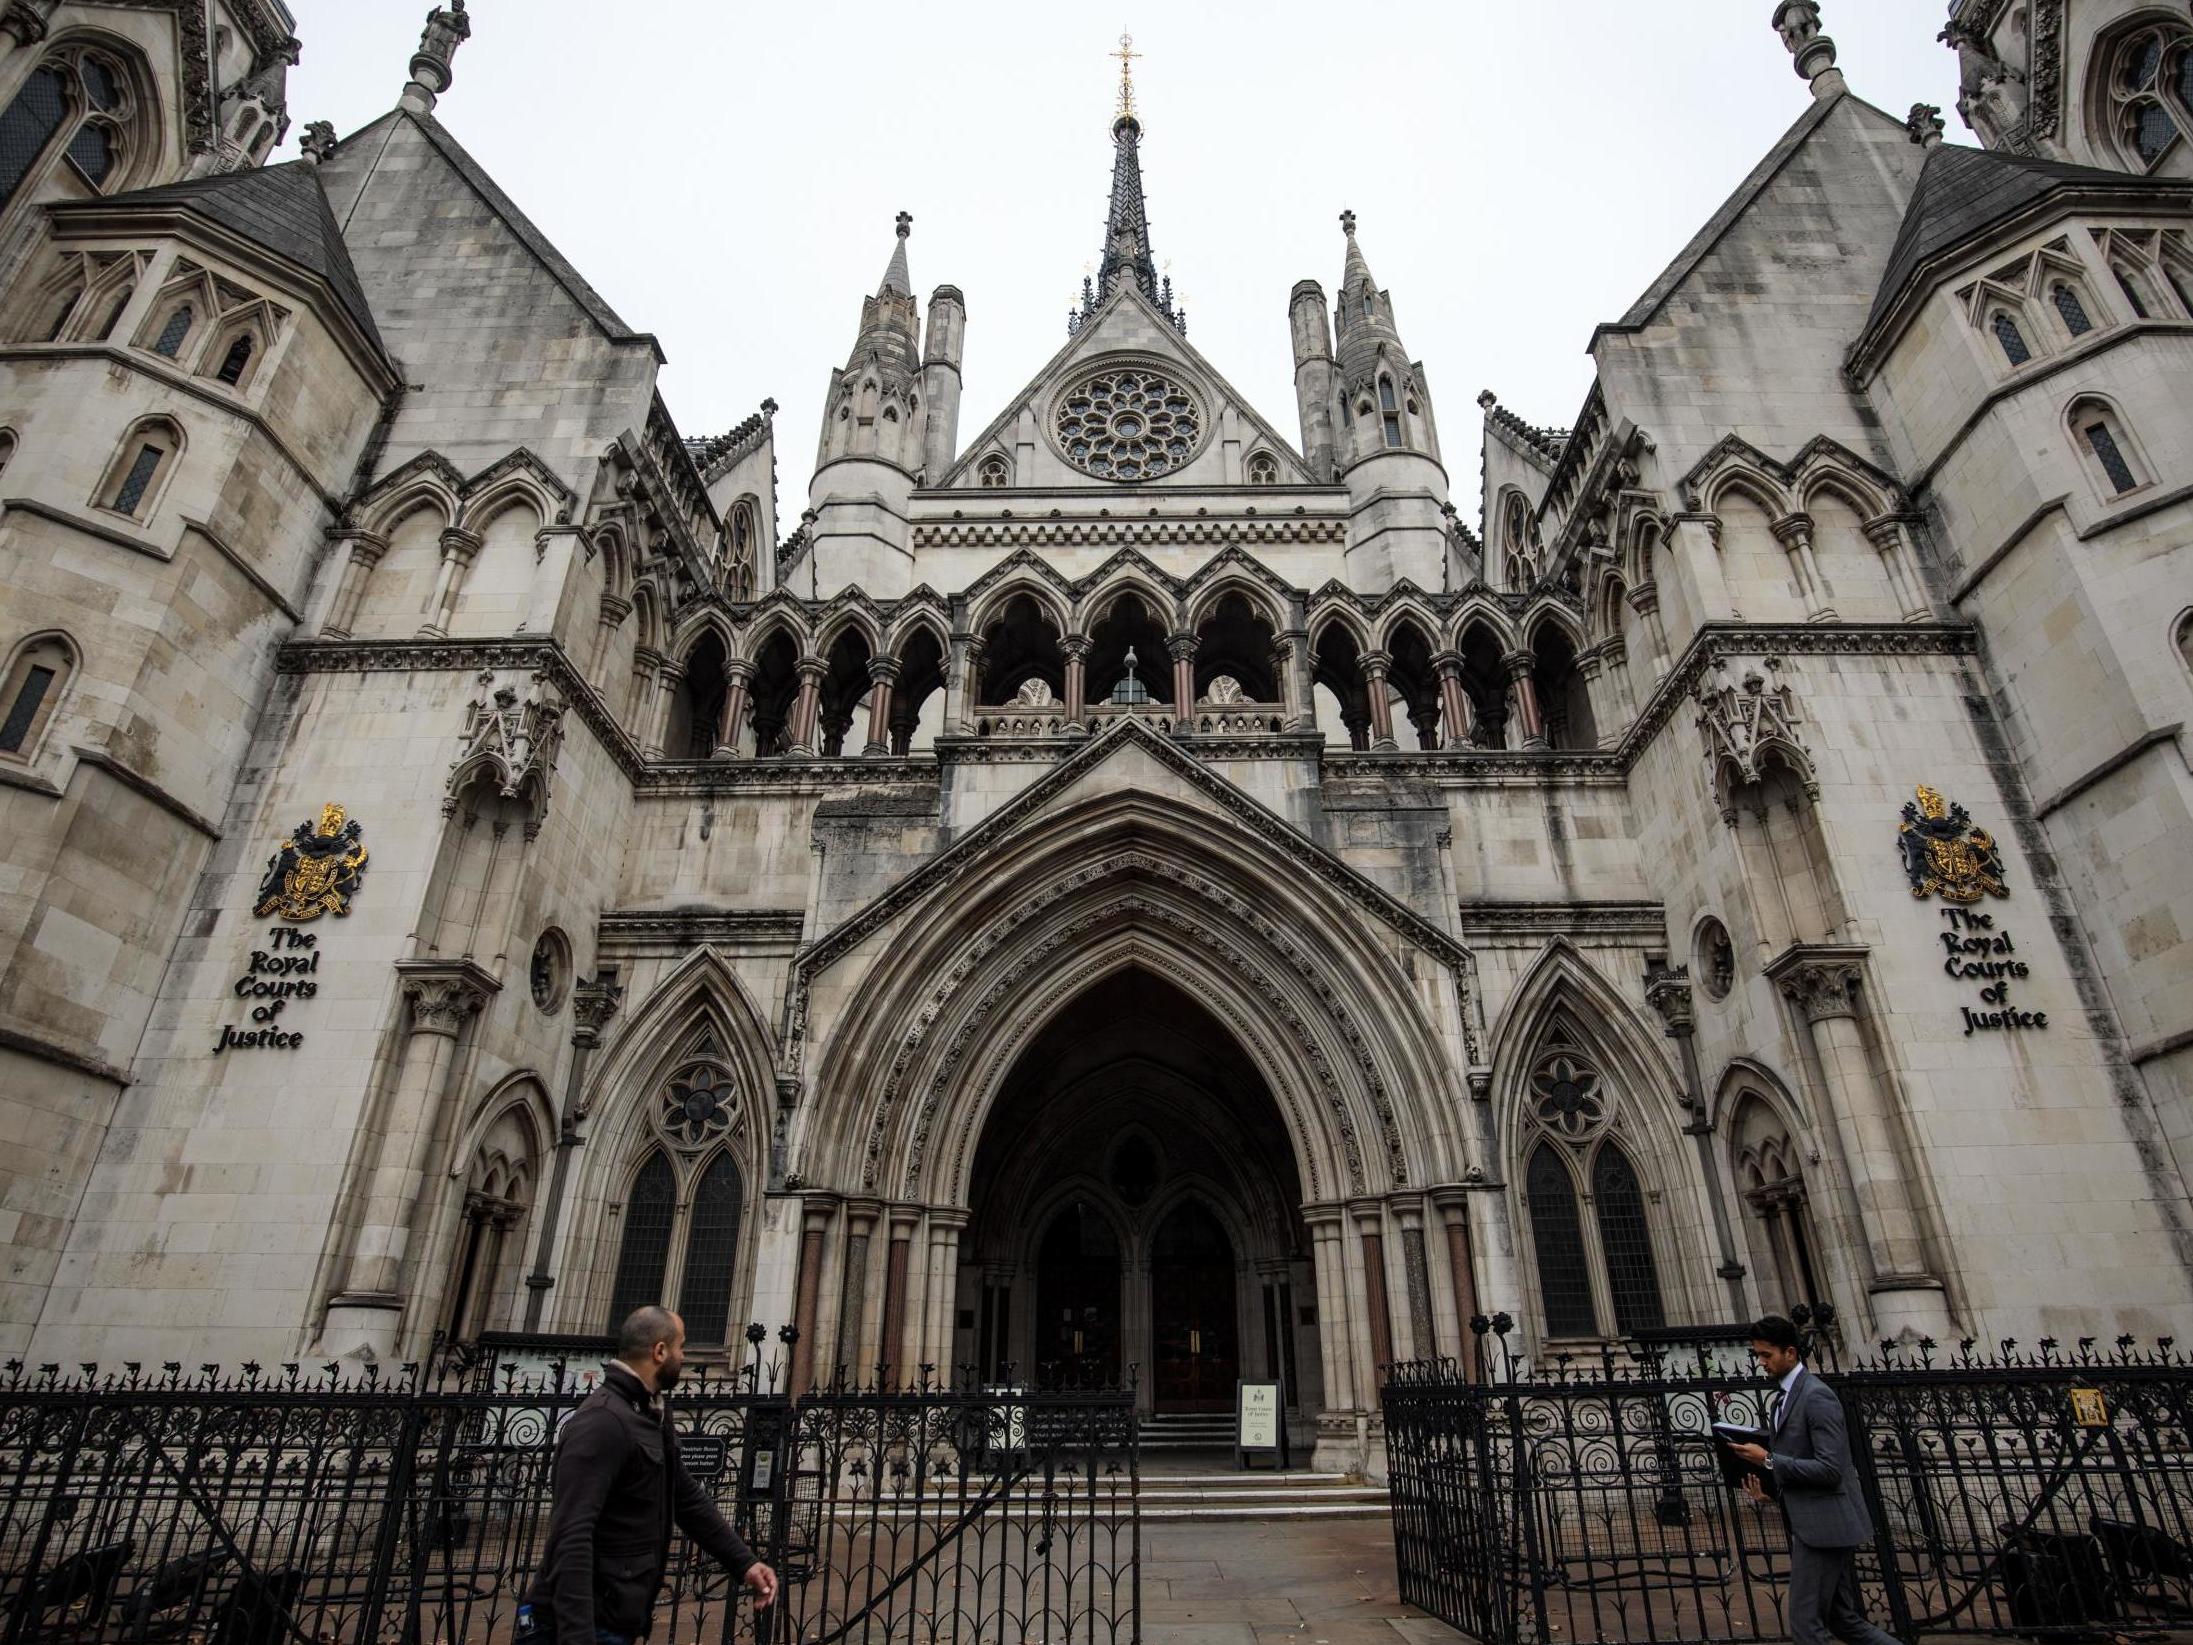 The case was heard in the Family Division of the High Court in London